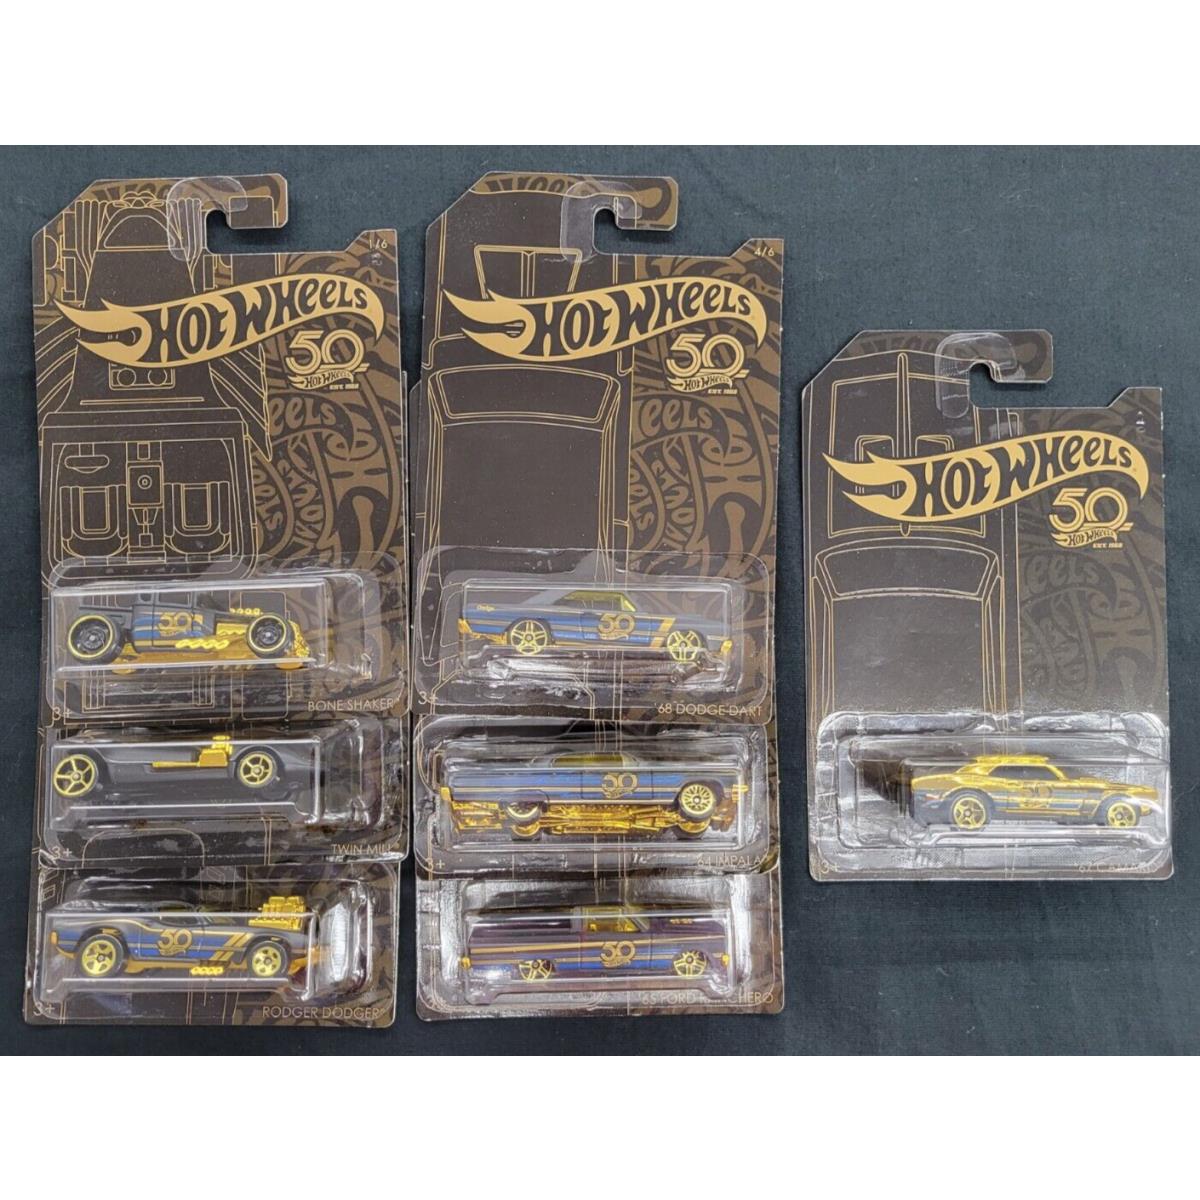 Hot Wheels Black and Gold Set with Chase - 2017 Hot Wheels